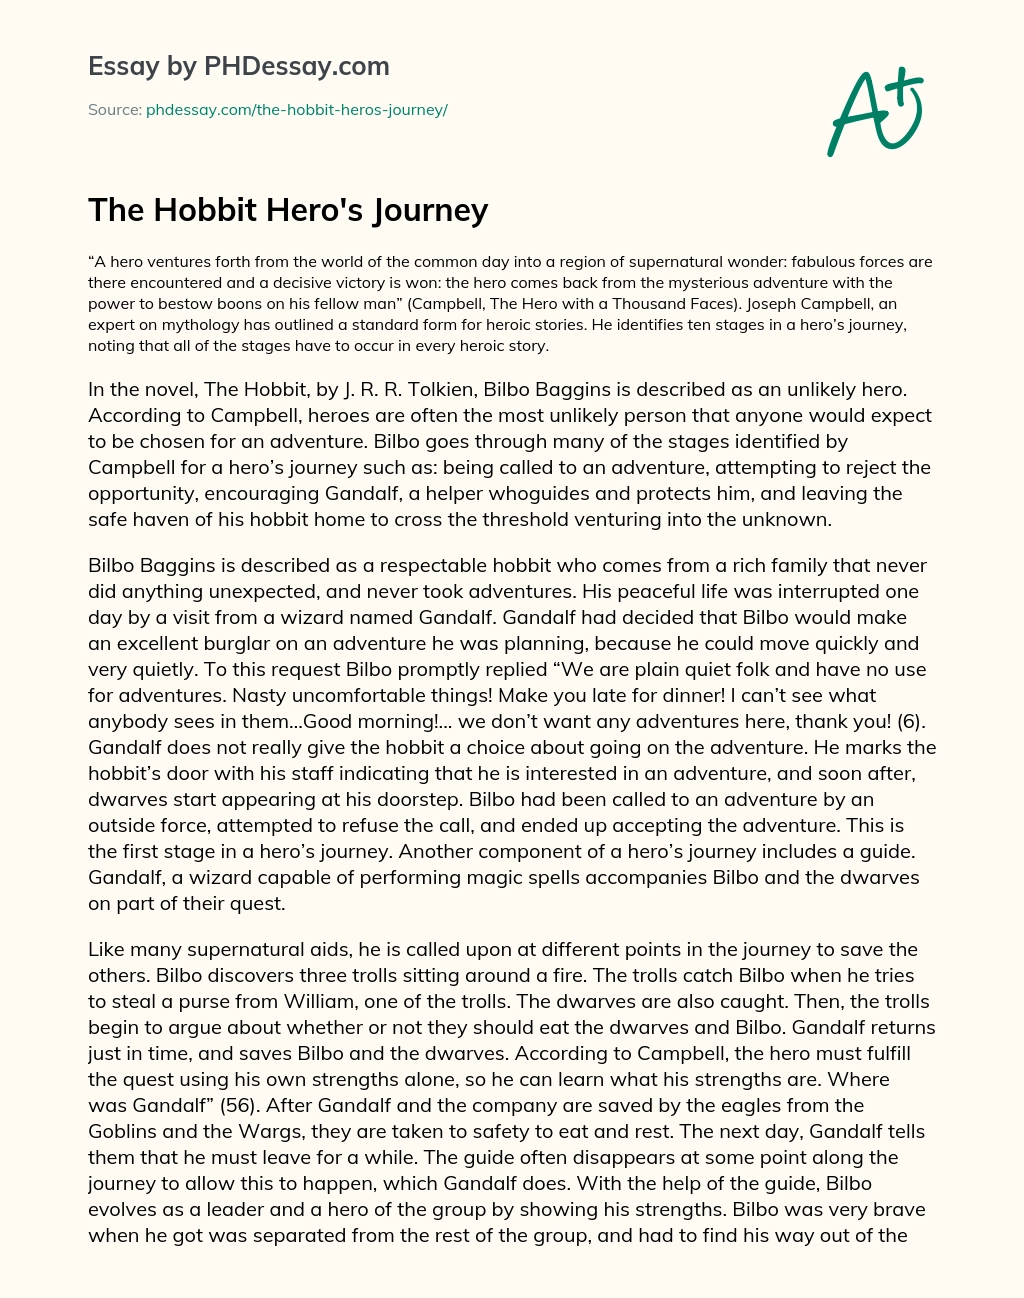 examples of a hero's journey essay